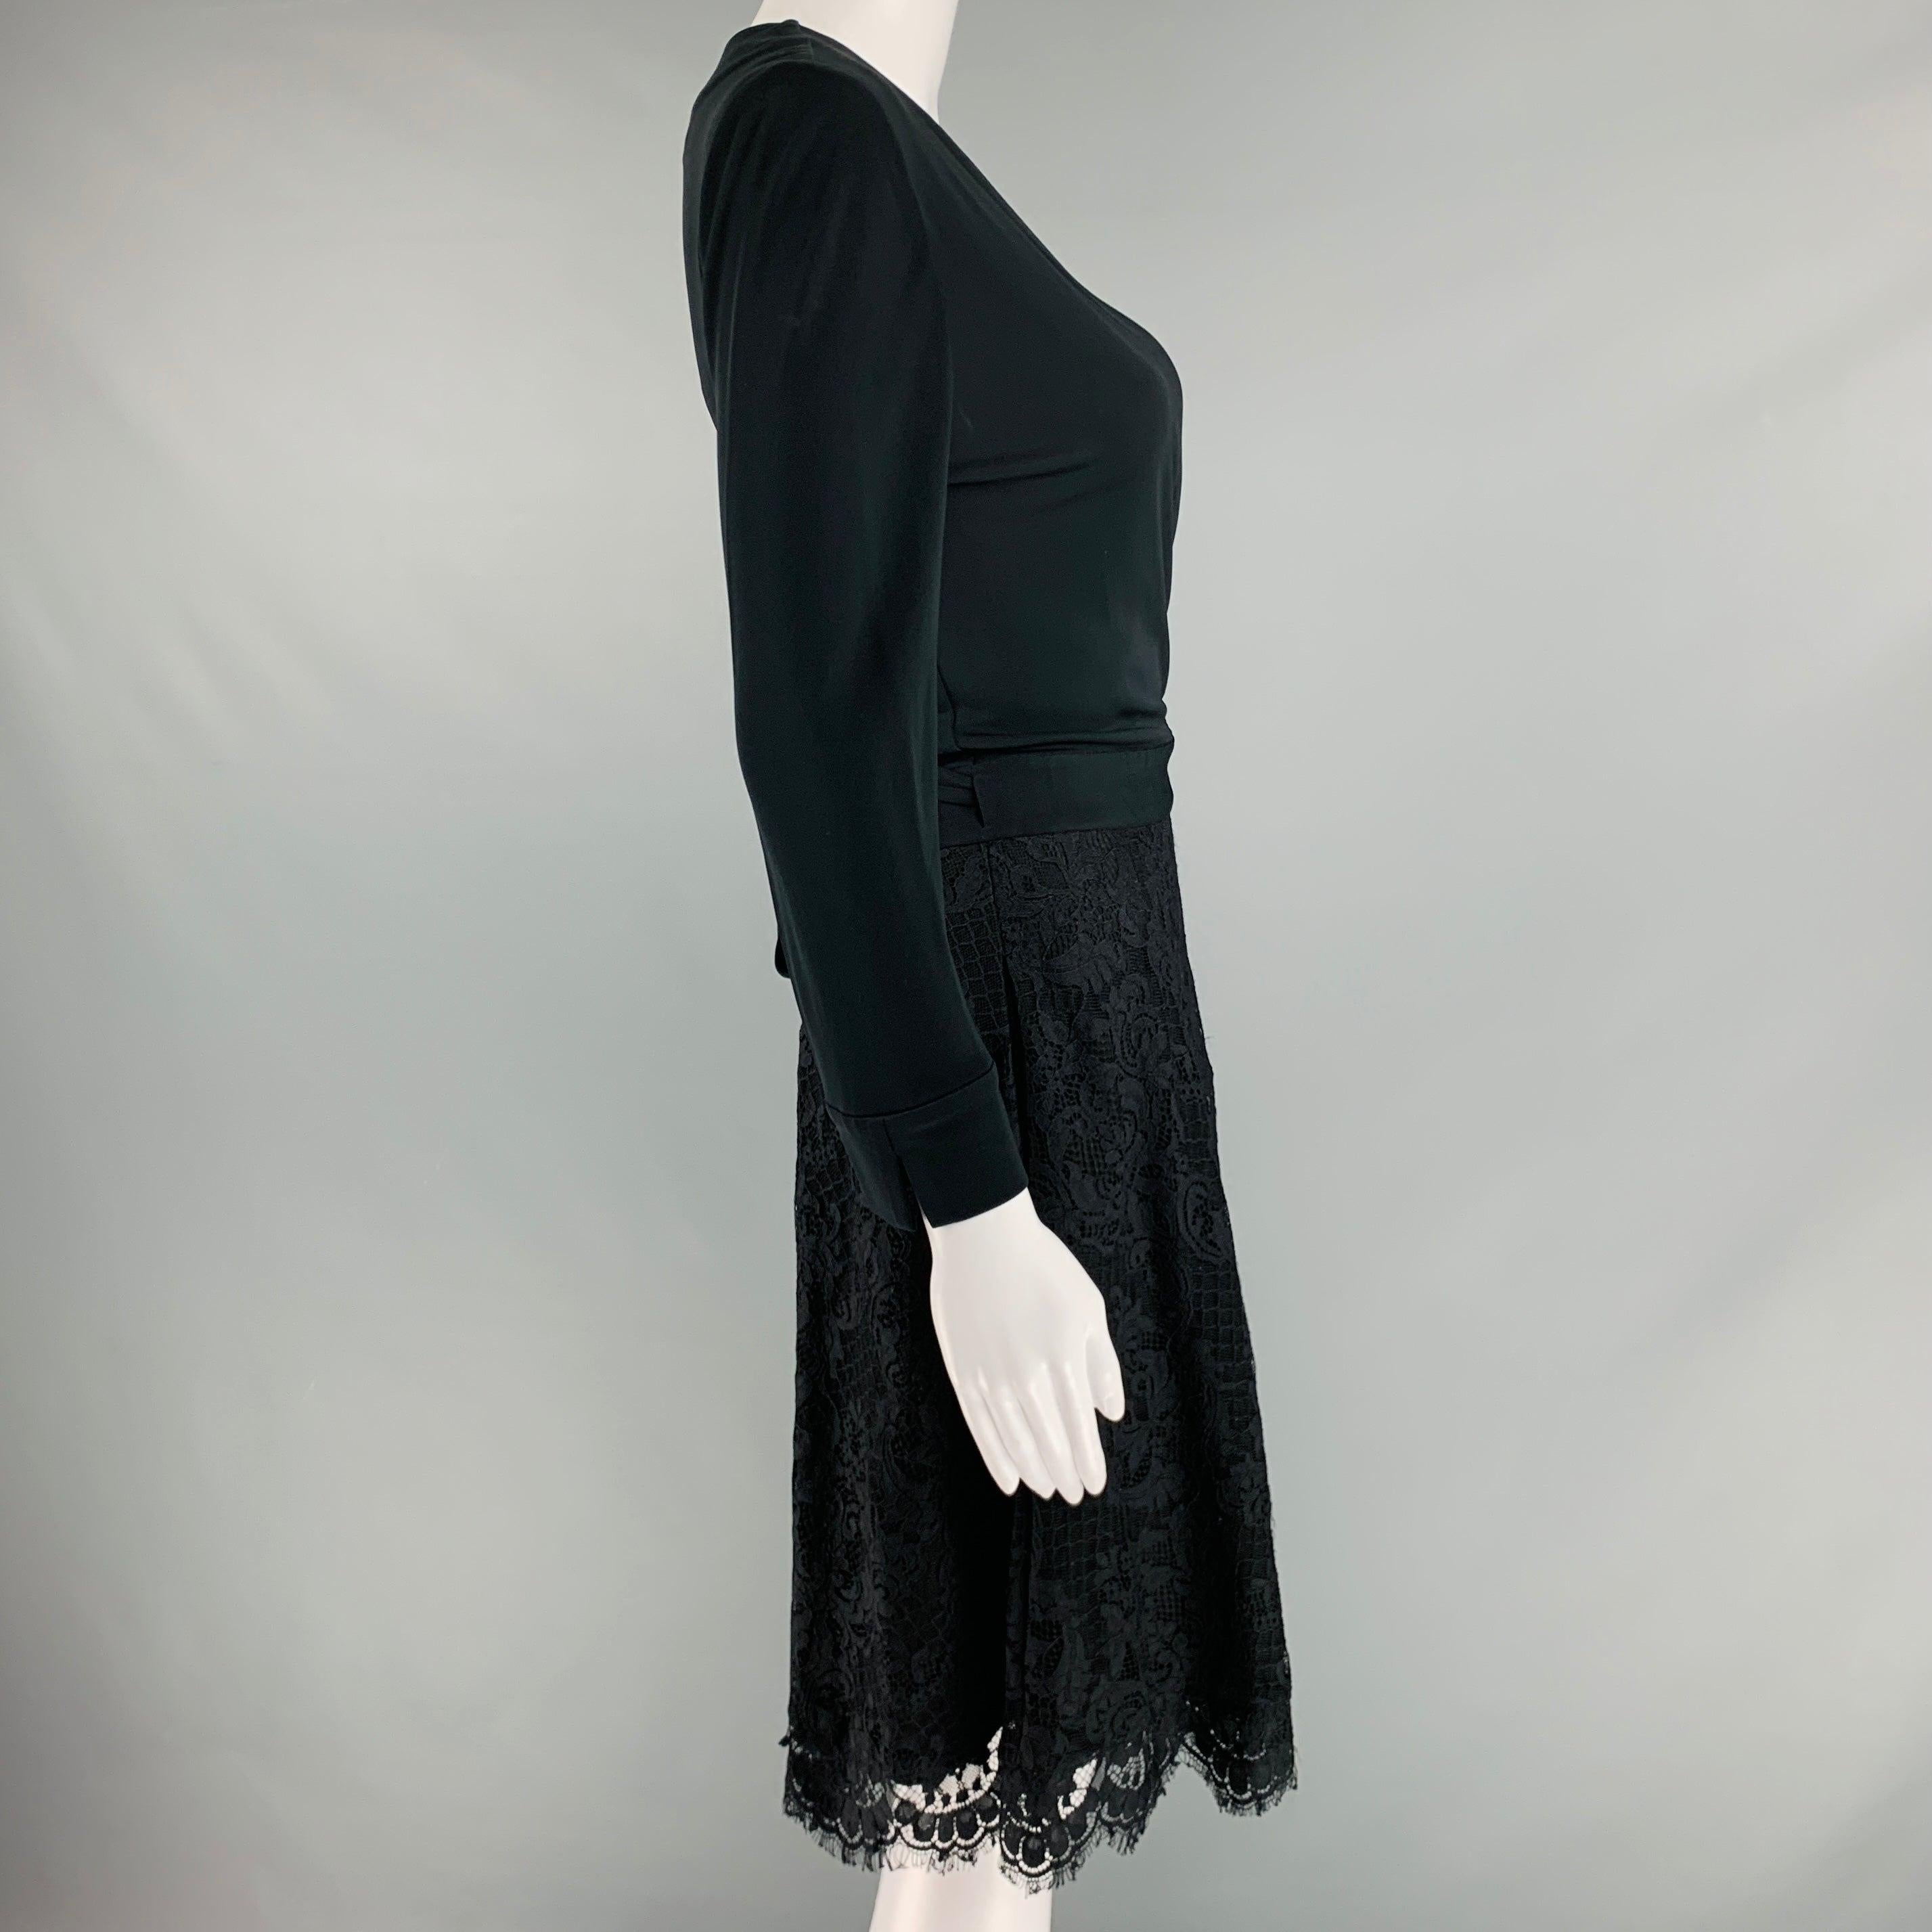 DIANE VON FURSTENBERG dress
in a black nylon fabric featuring a lace skirt, long sleeves, V-neck, and wrap style tie closure.Very Good Pre-Owned Condition. Signs of wear on lace. 

Marked:   4 

Measurements: 
 
Shoulder: 15 inches Sleeve: 21 inches